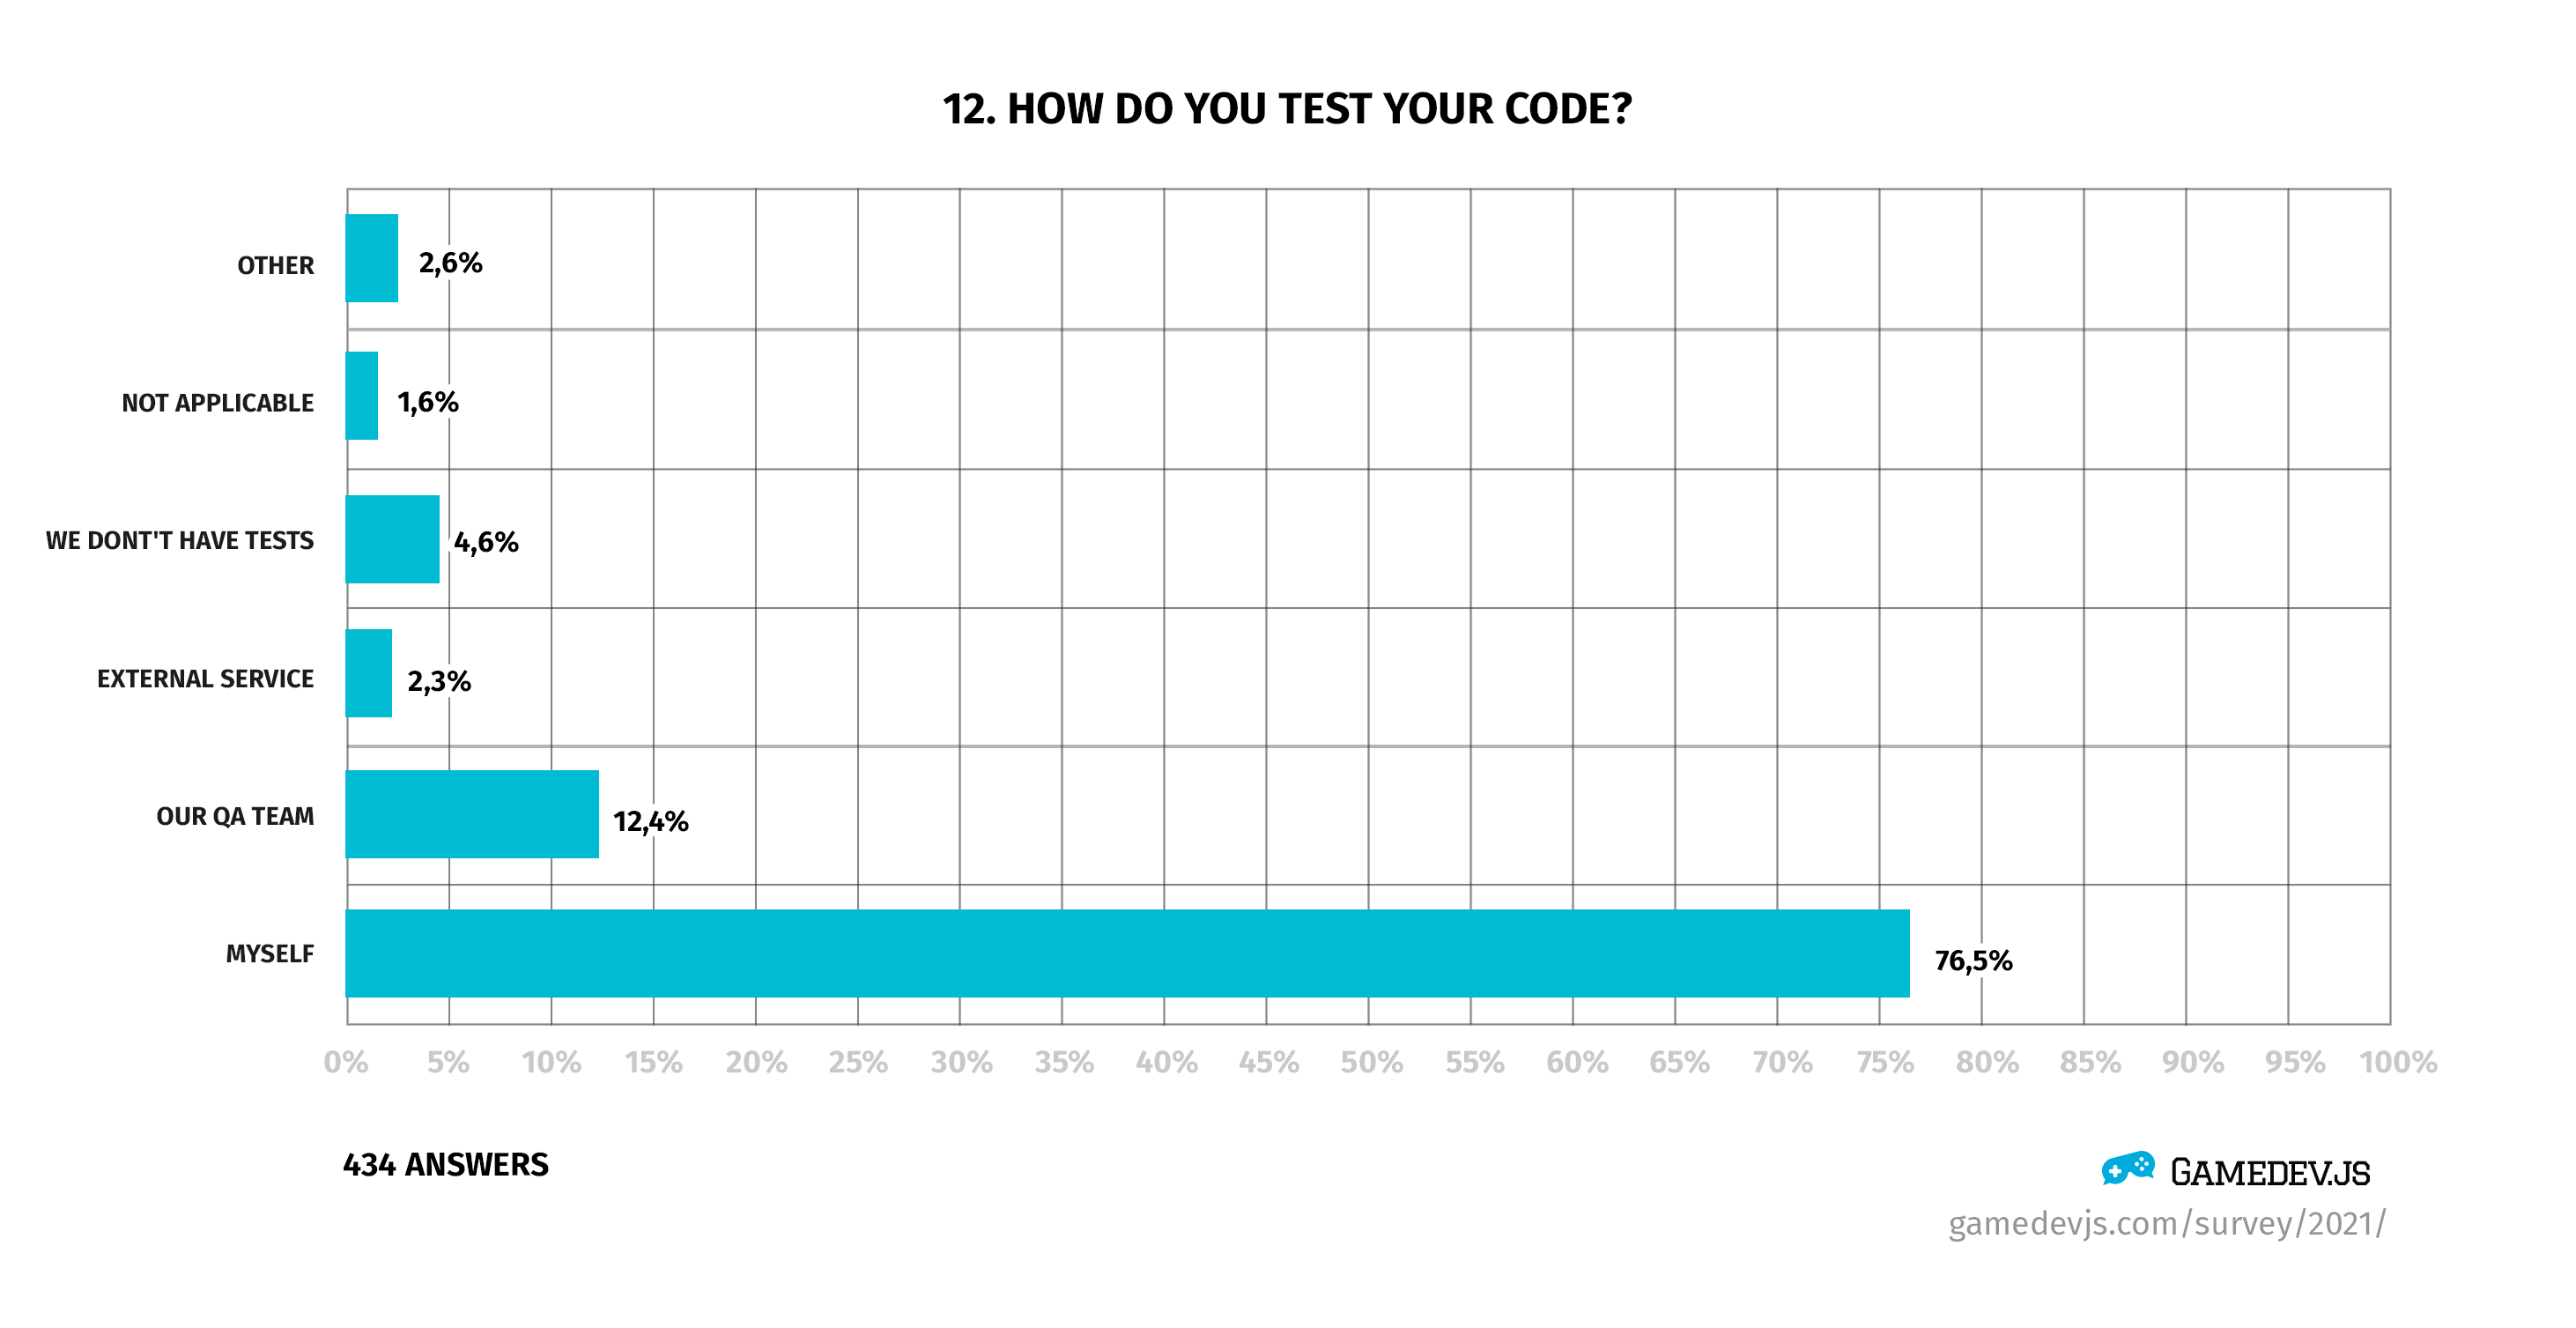 Gamedev.js Survey 2021 - Question #12: How do you test your code?